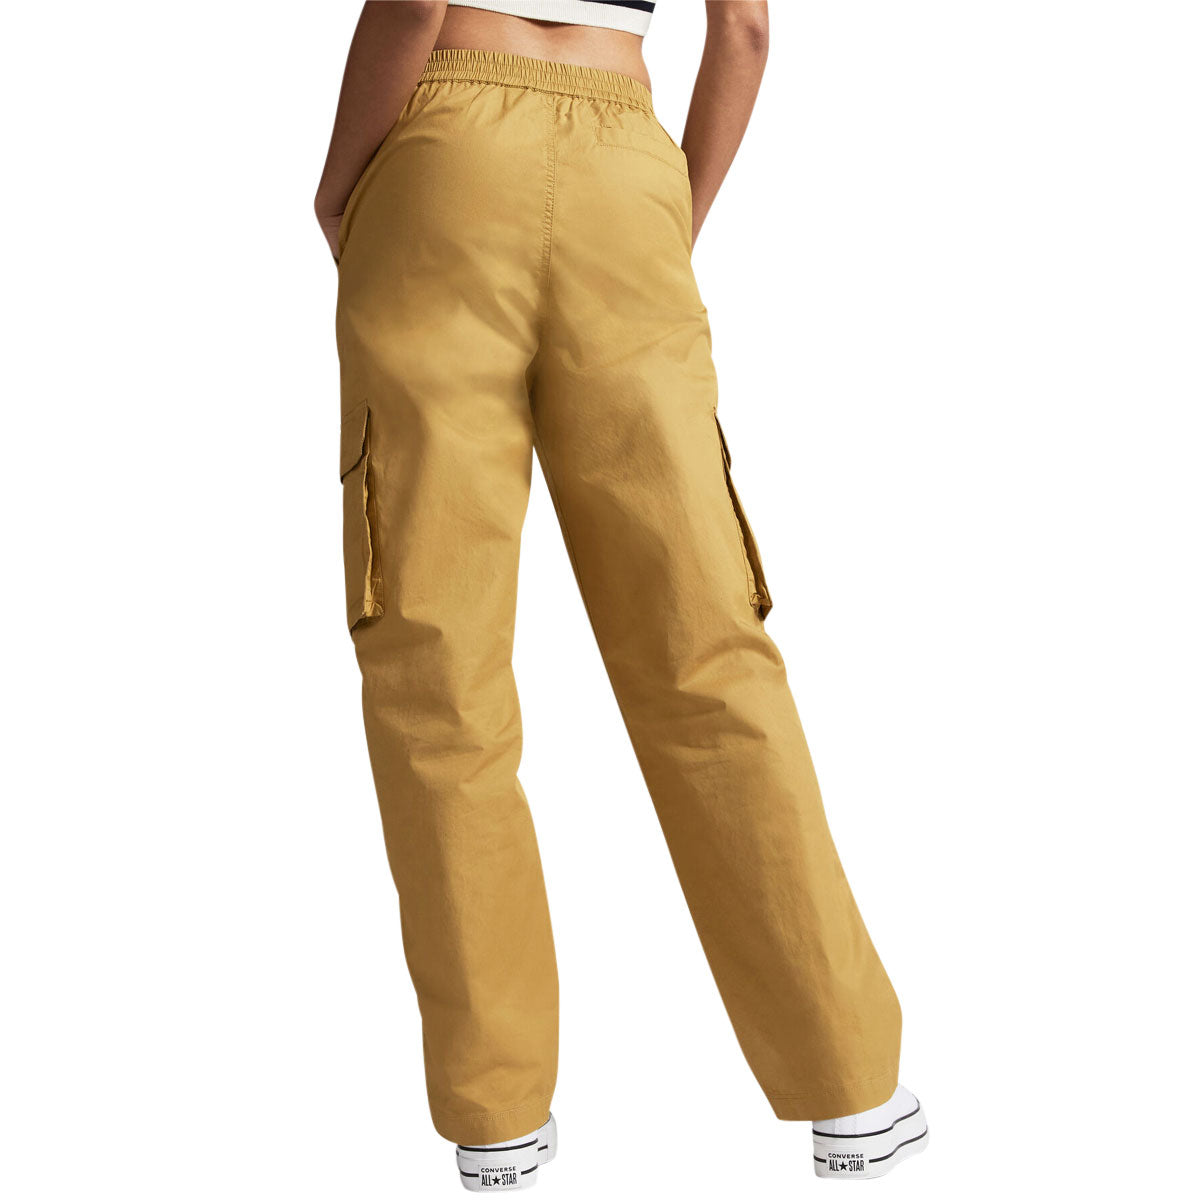 Converse Relaxed Cargo Pants - Dunescape image 2